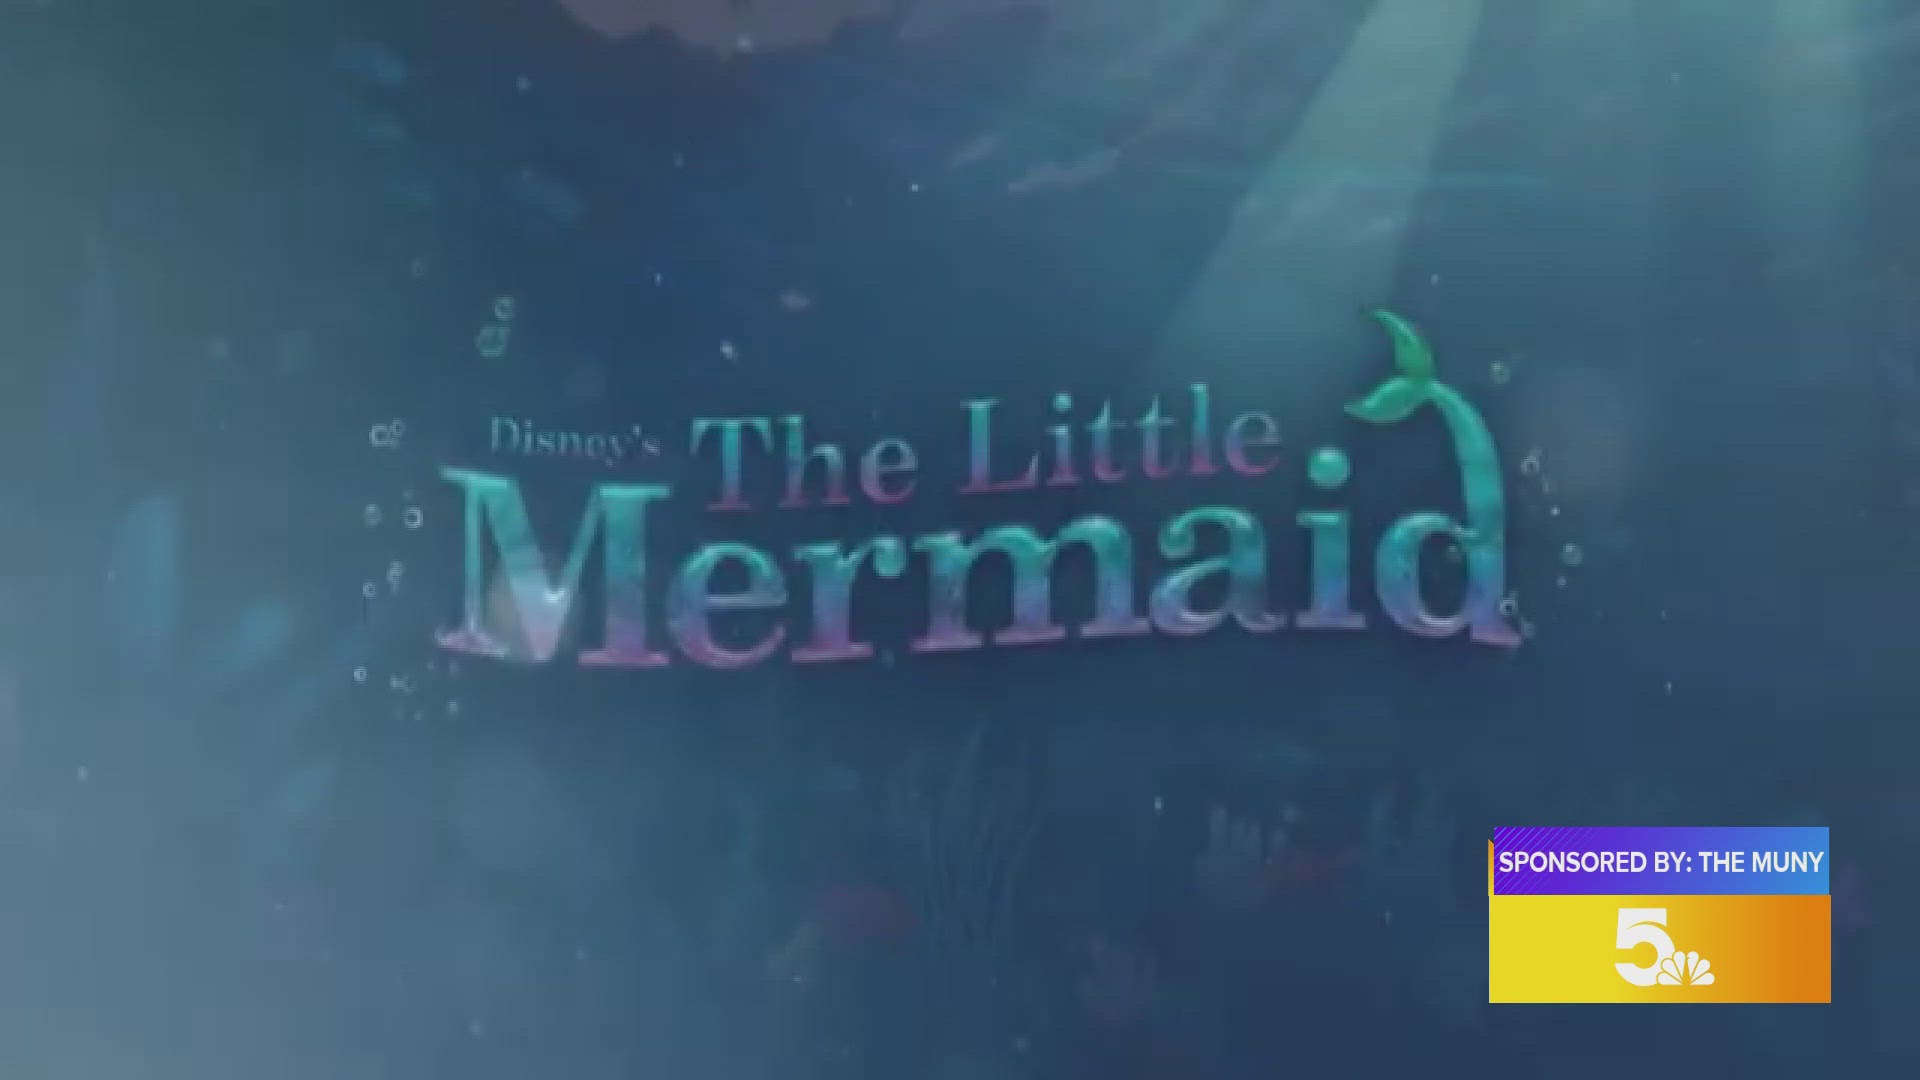 One winner will receive a pair of tickets to opening night for The Little Mermaid at the Muny on July 8.